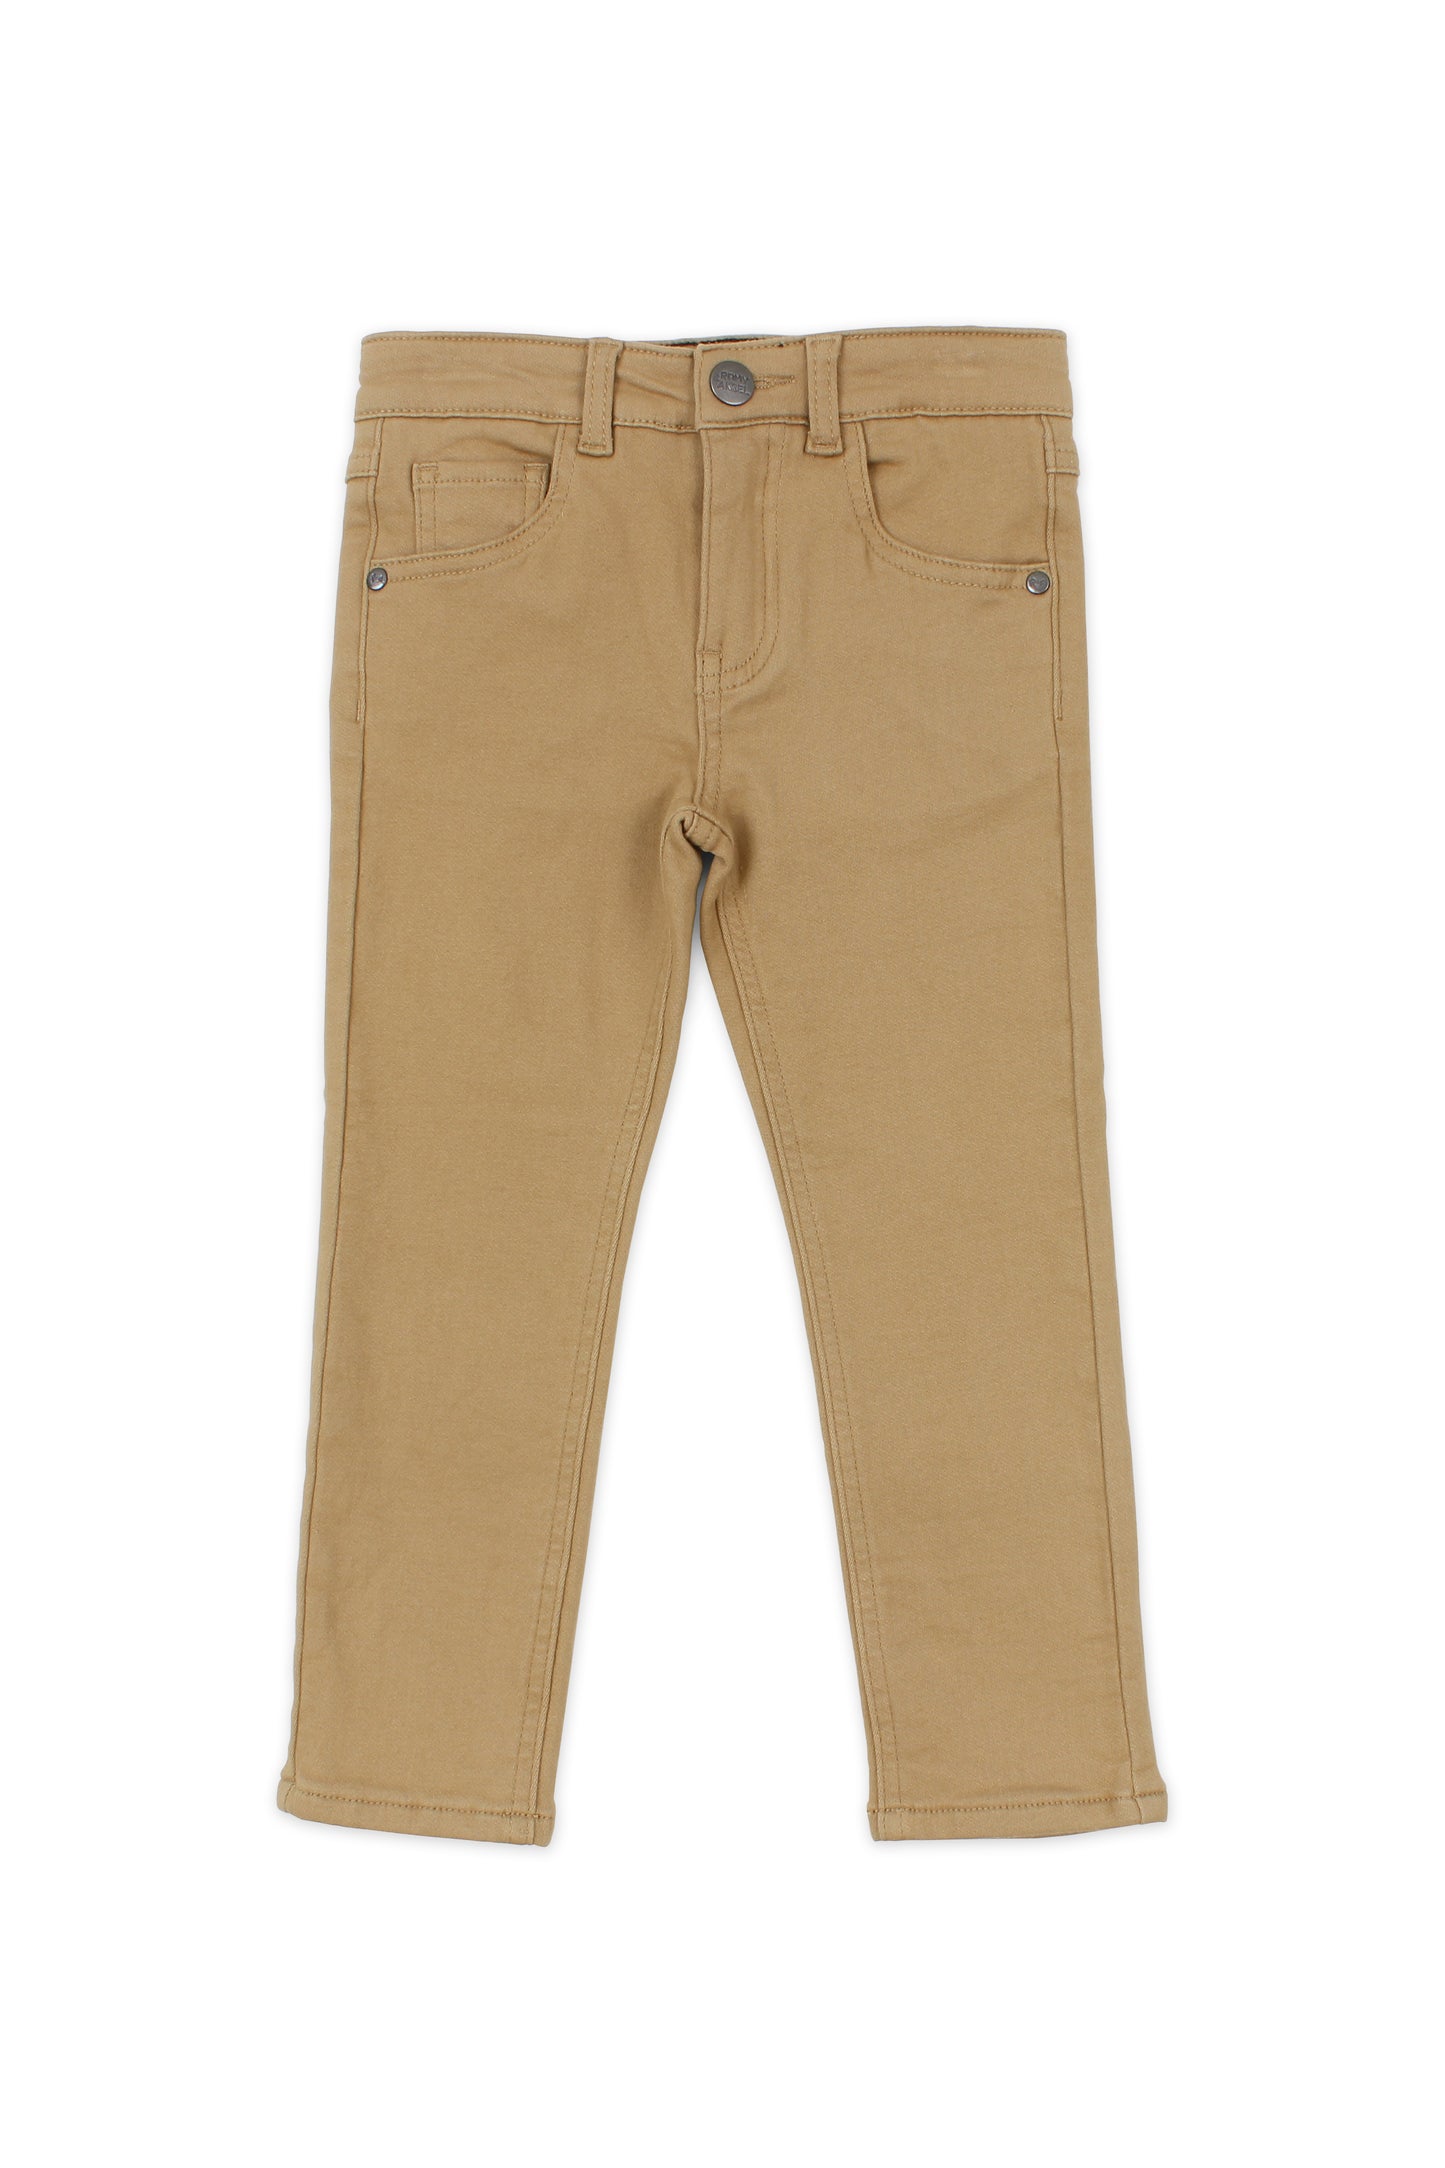 Romy&Aksel beige jeans for boys 2 to 8 years